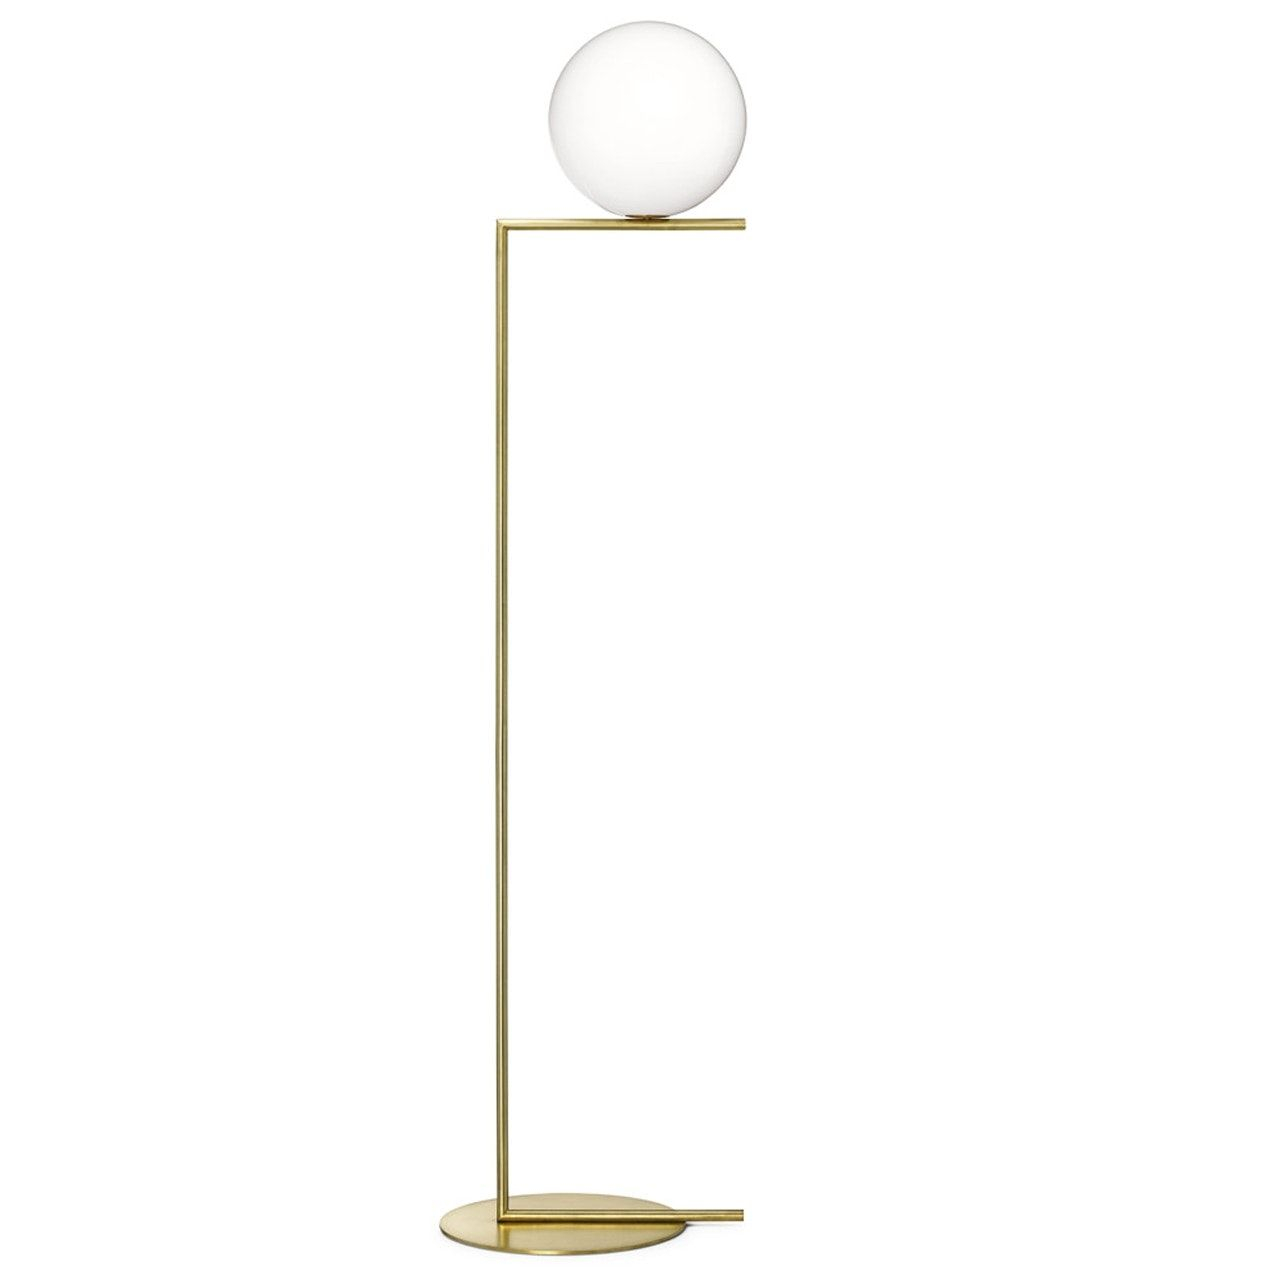 Pin On Creative Floor Lamps Flos intended for dimensions 1280 X 1280